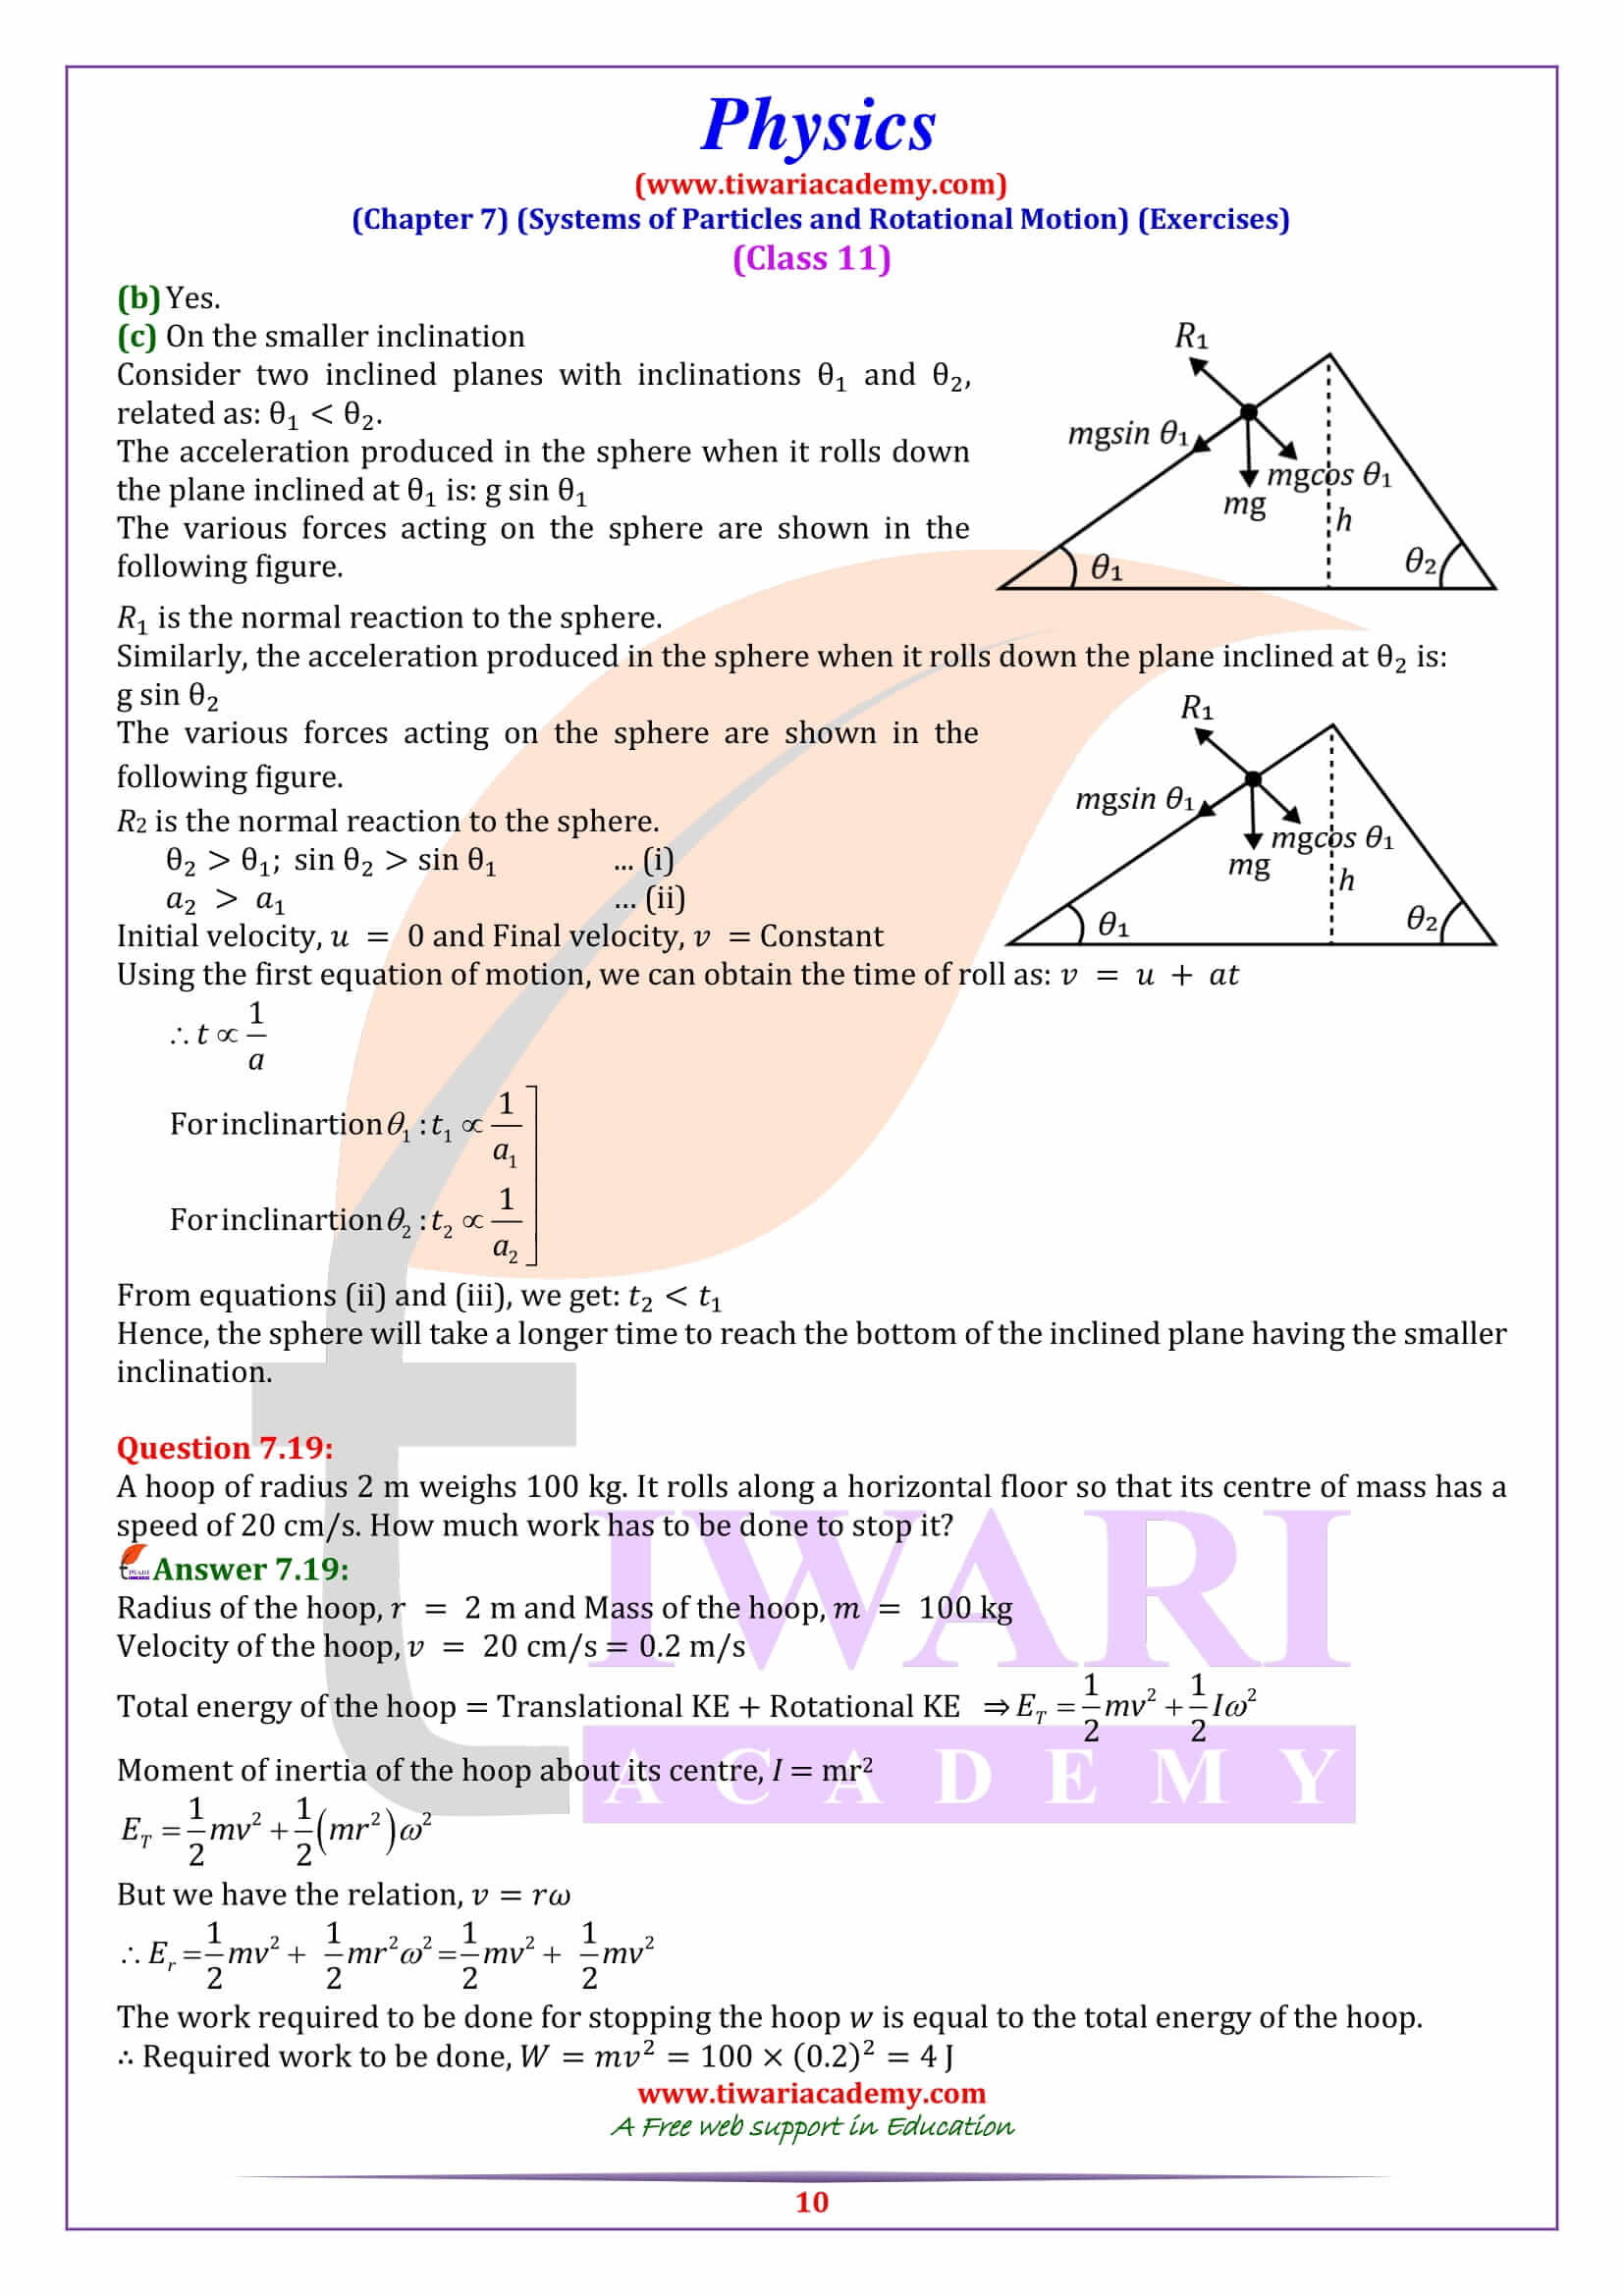 Class 11 Physics Chapter 7 Exercise numericals